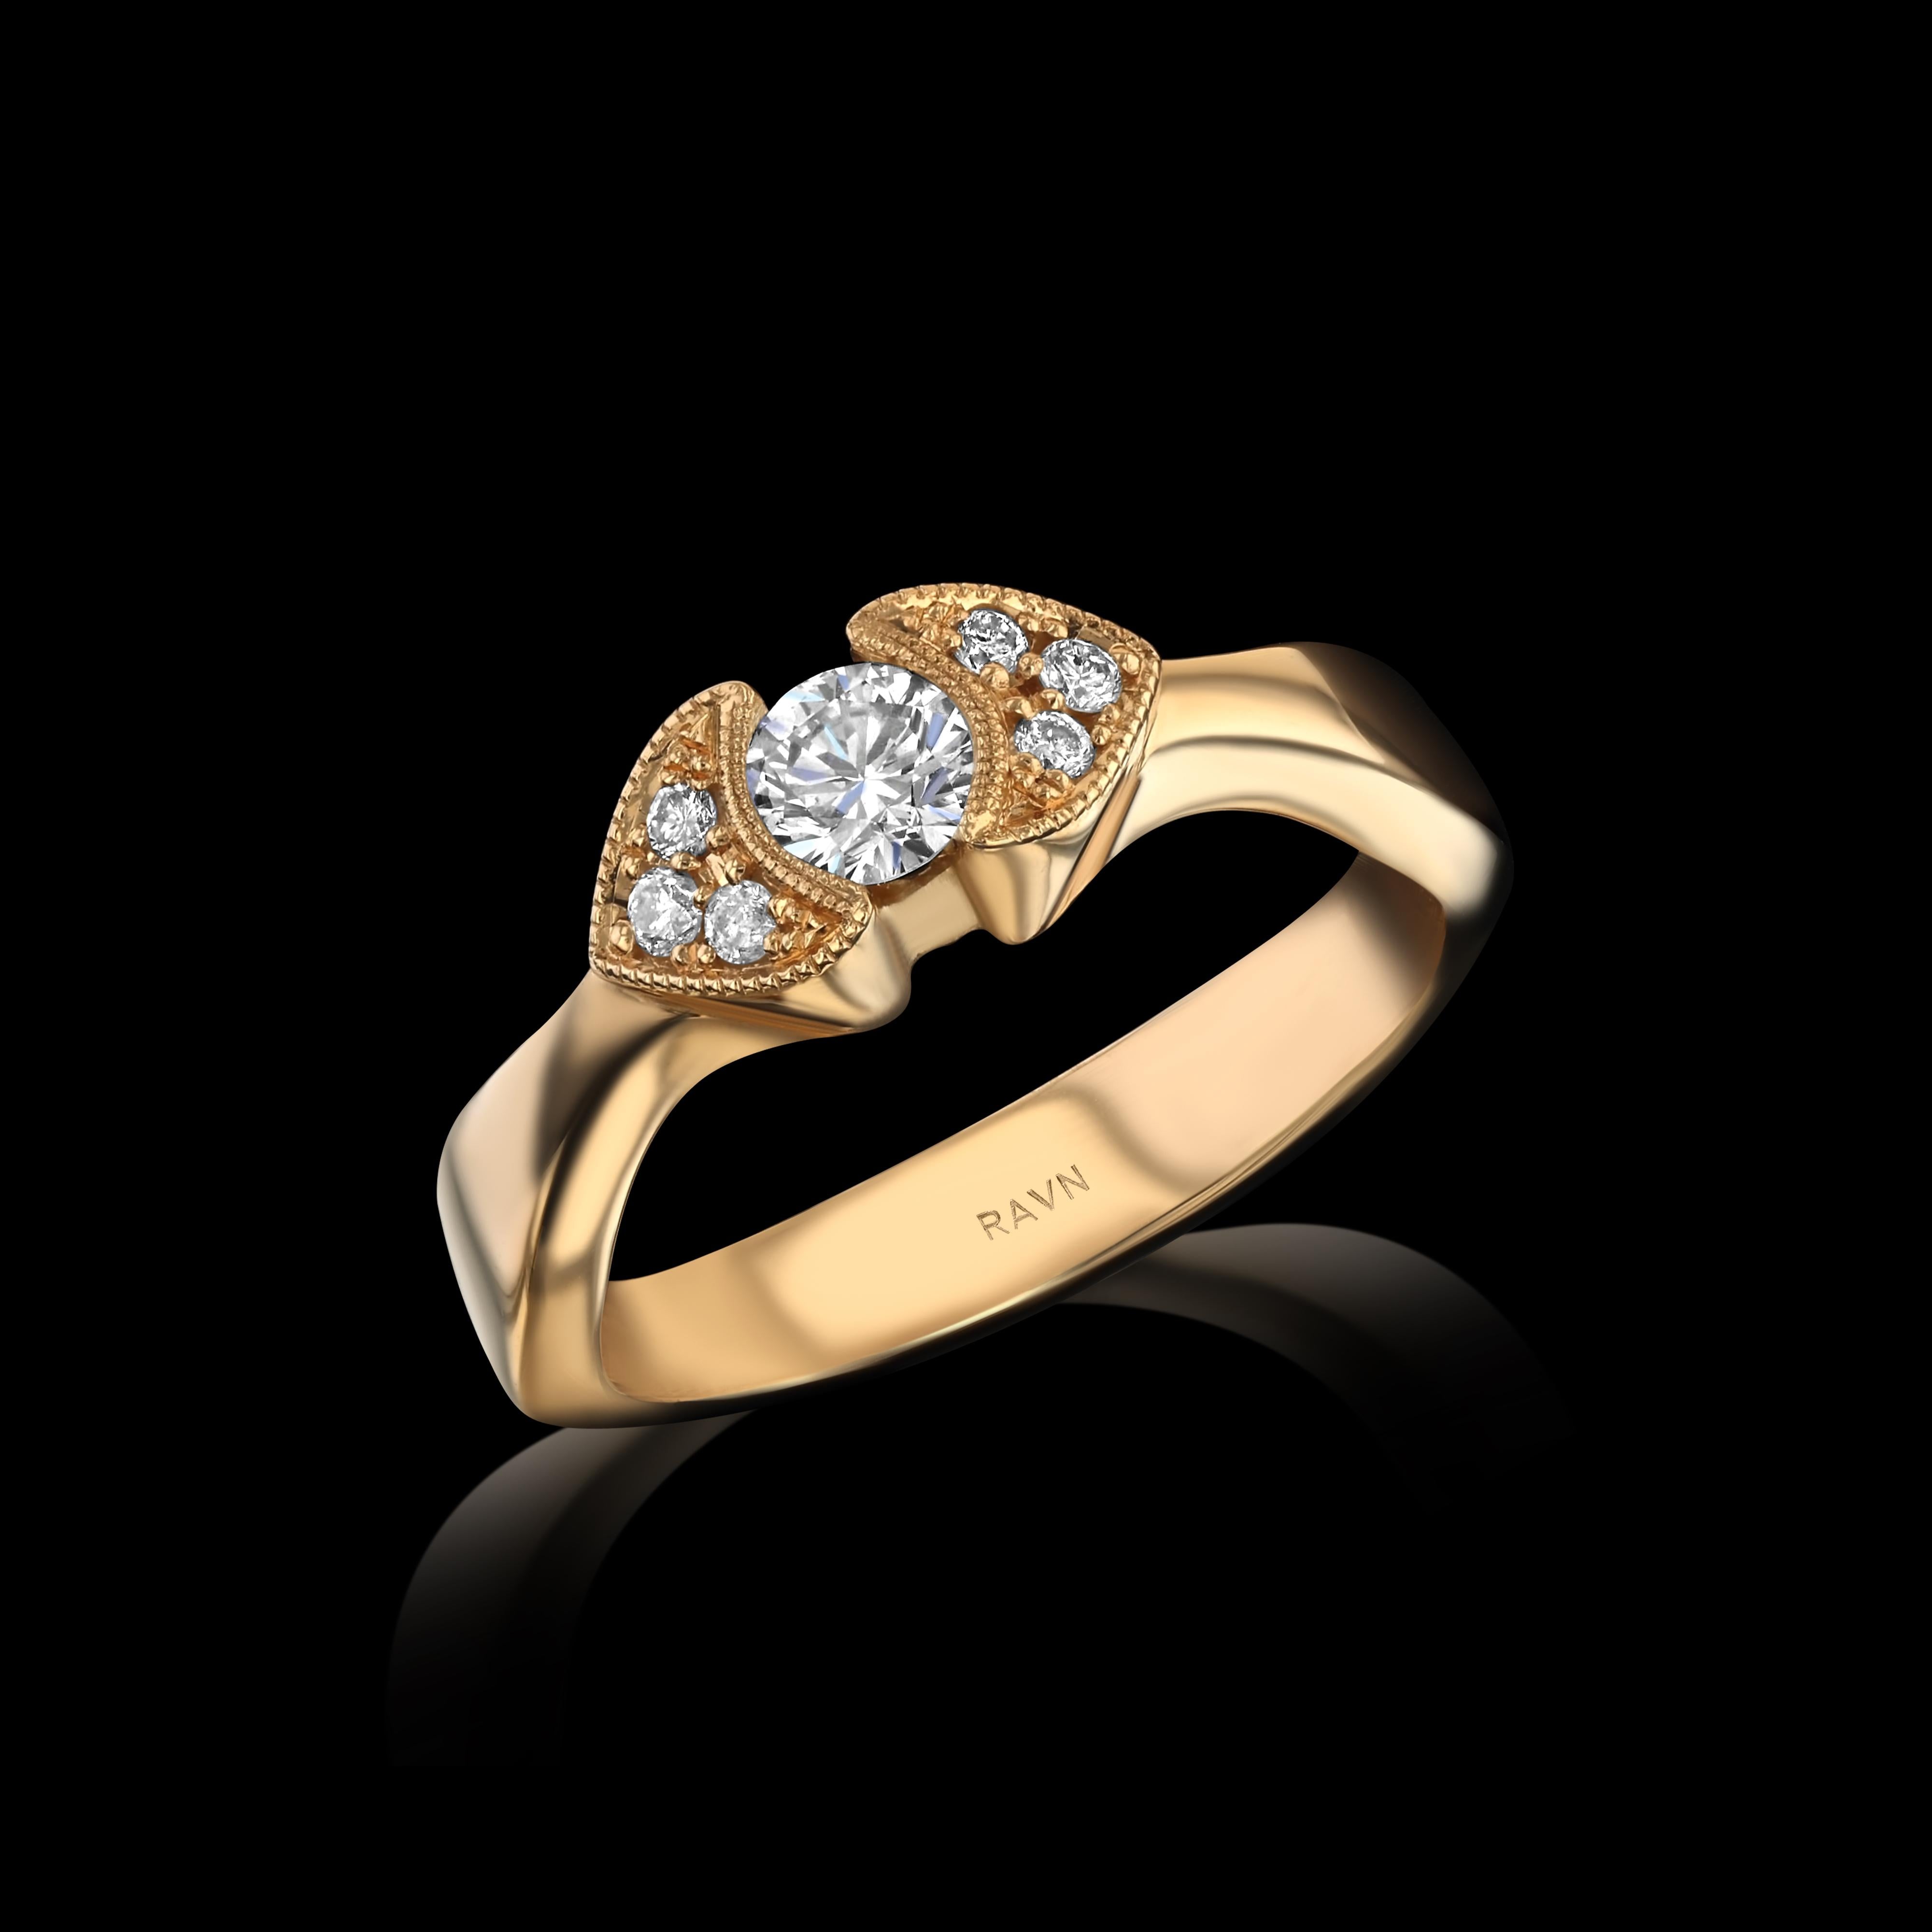 18k rose gold, hand carved diamond ring with 0.28ct center diamond and 6 accent diamonds on heart sides from the House of RAVN Diamond Collection.   



The House of RAVN Diamond Collection is as an opulent testament to the fusion of artistry,